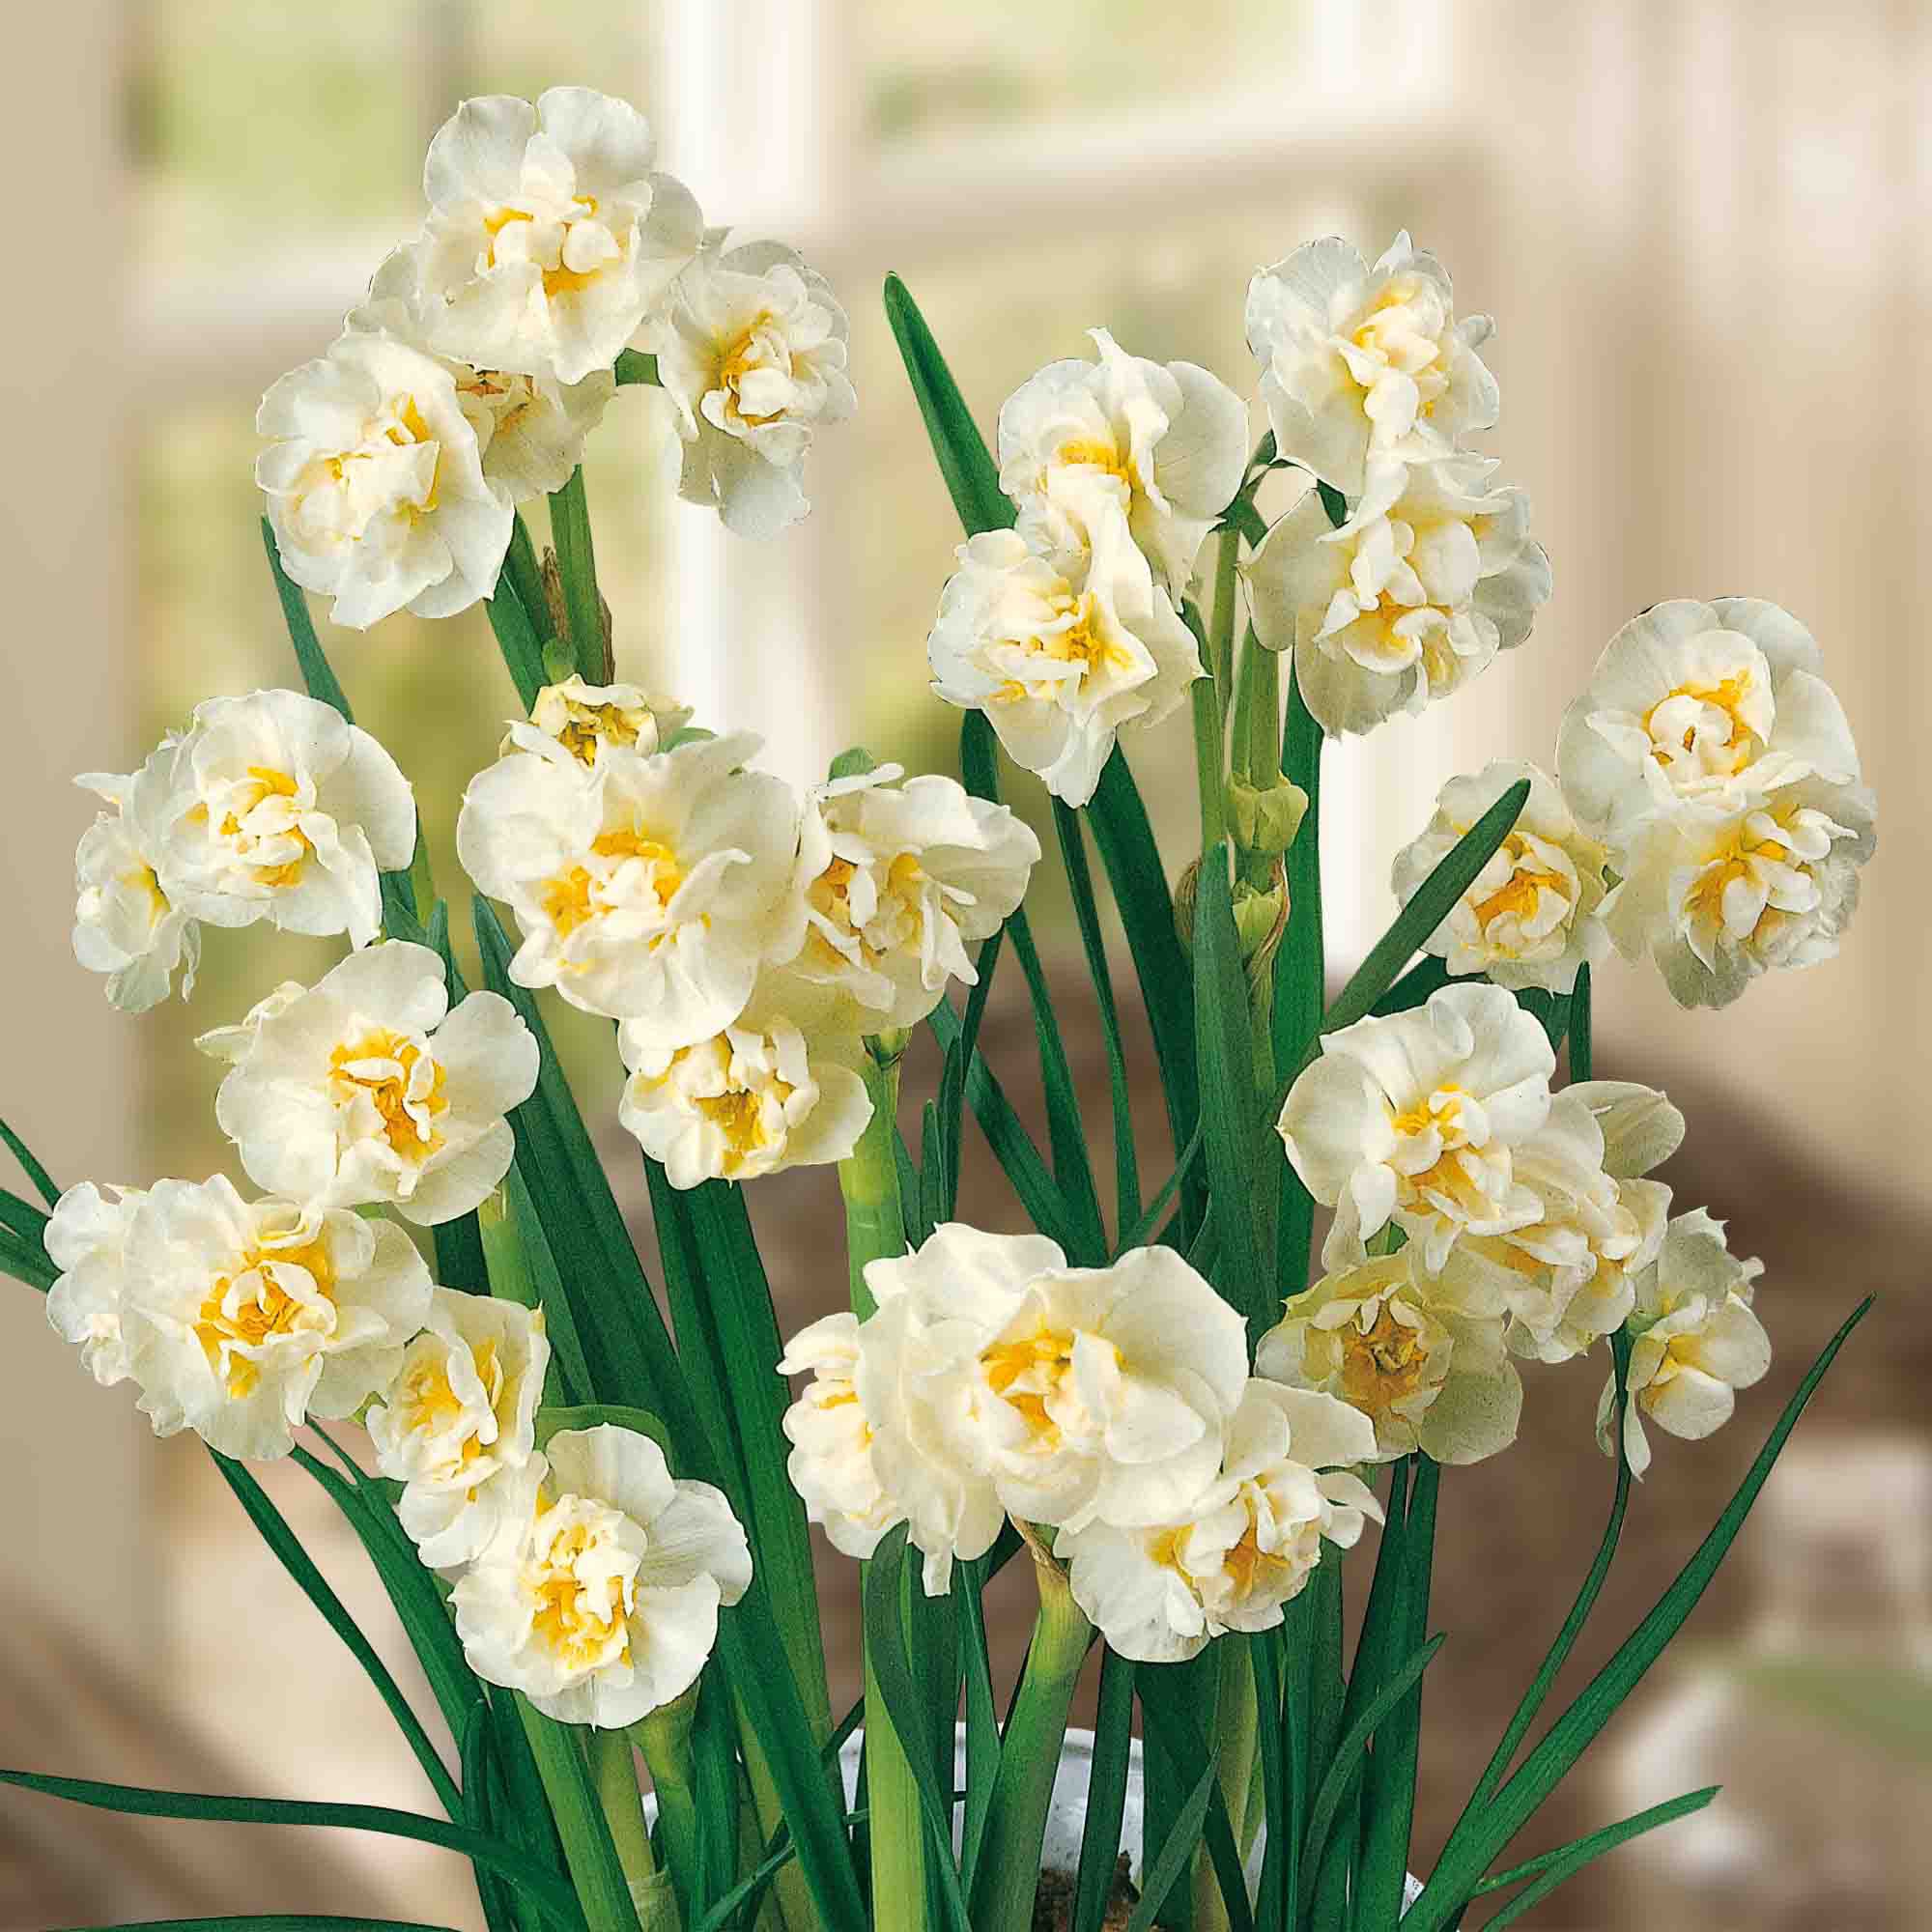 Narcissus Bridal Crown Yellow Flower bulb, in red pot